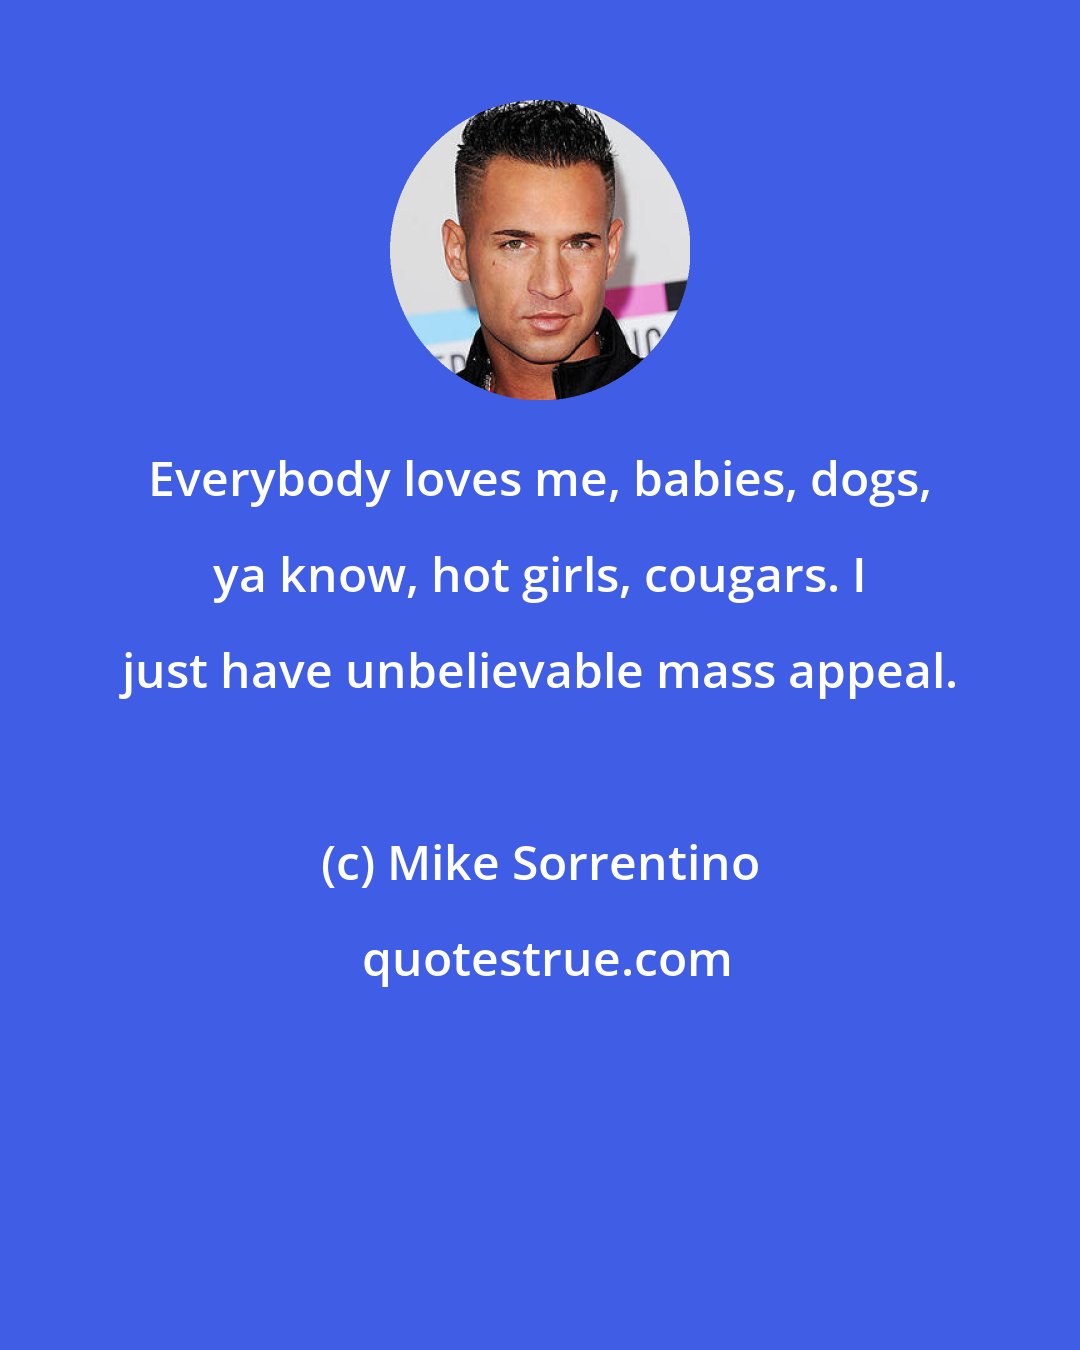 Mike Sorrentino: Everybody loves me, babies, dogs, ya know, hot girls, cougars. I just have unbelievable mass appeal.